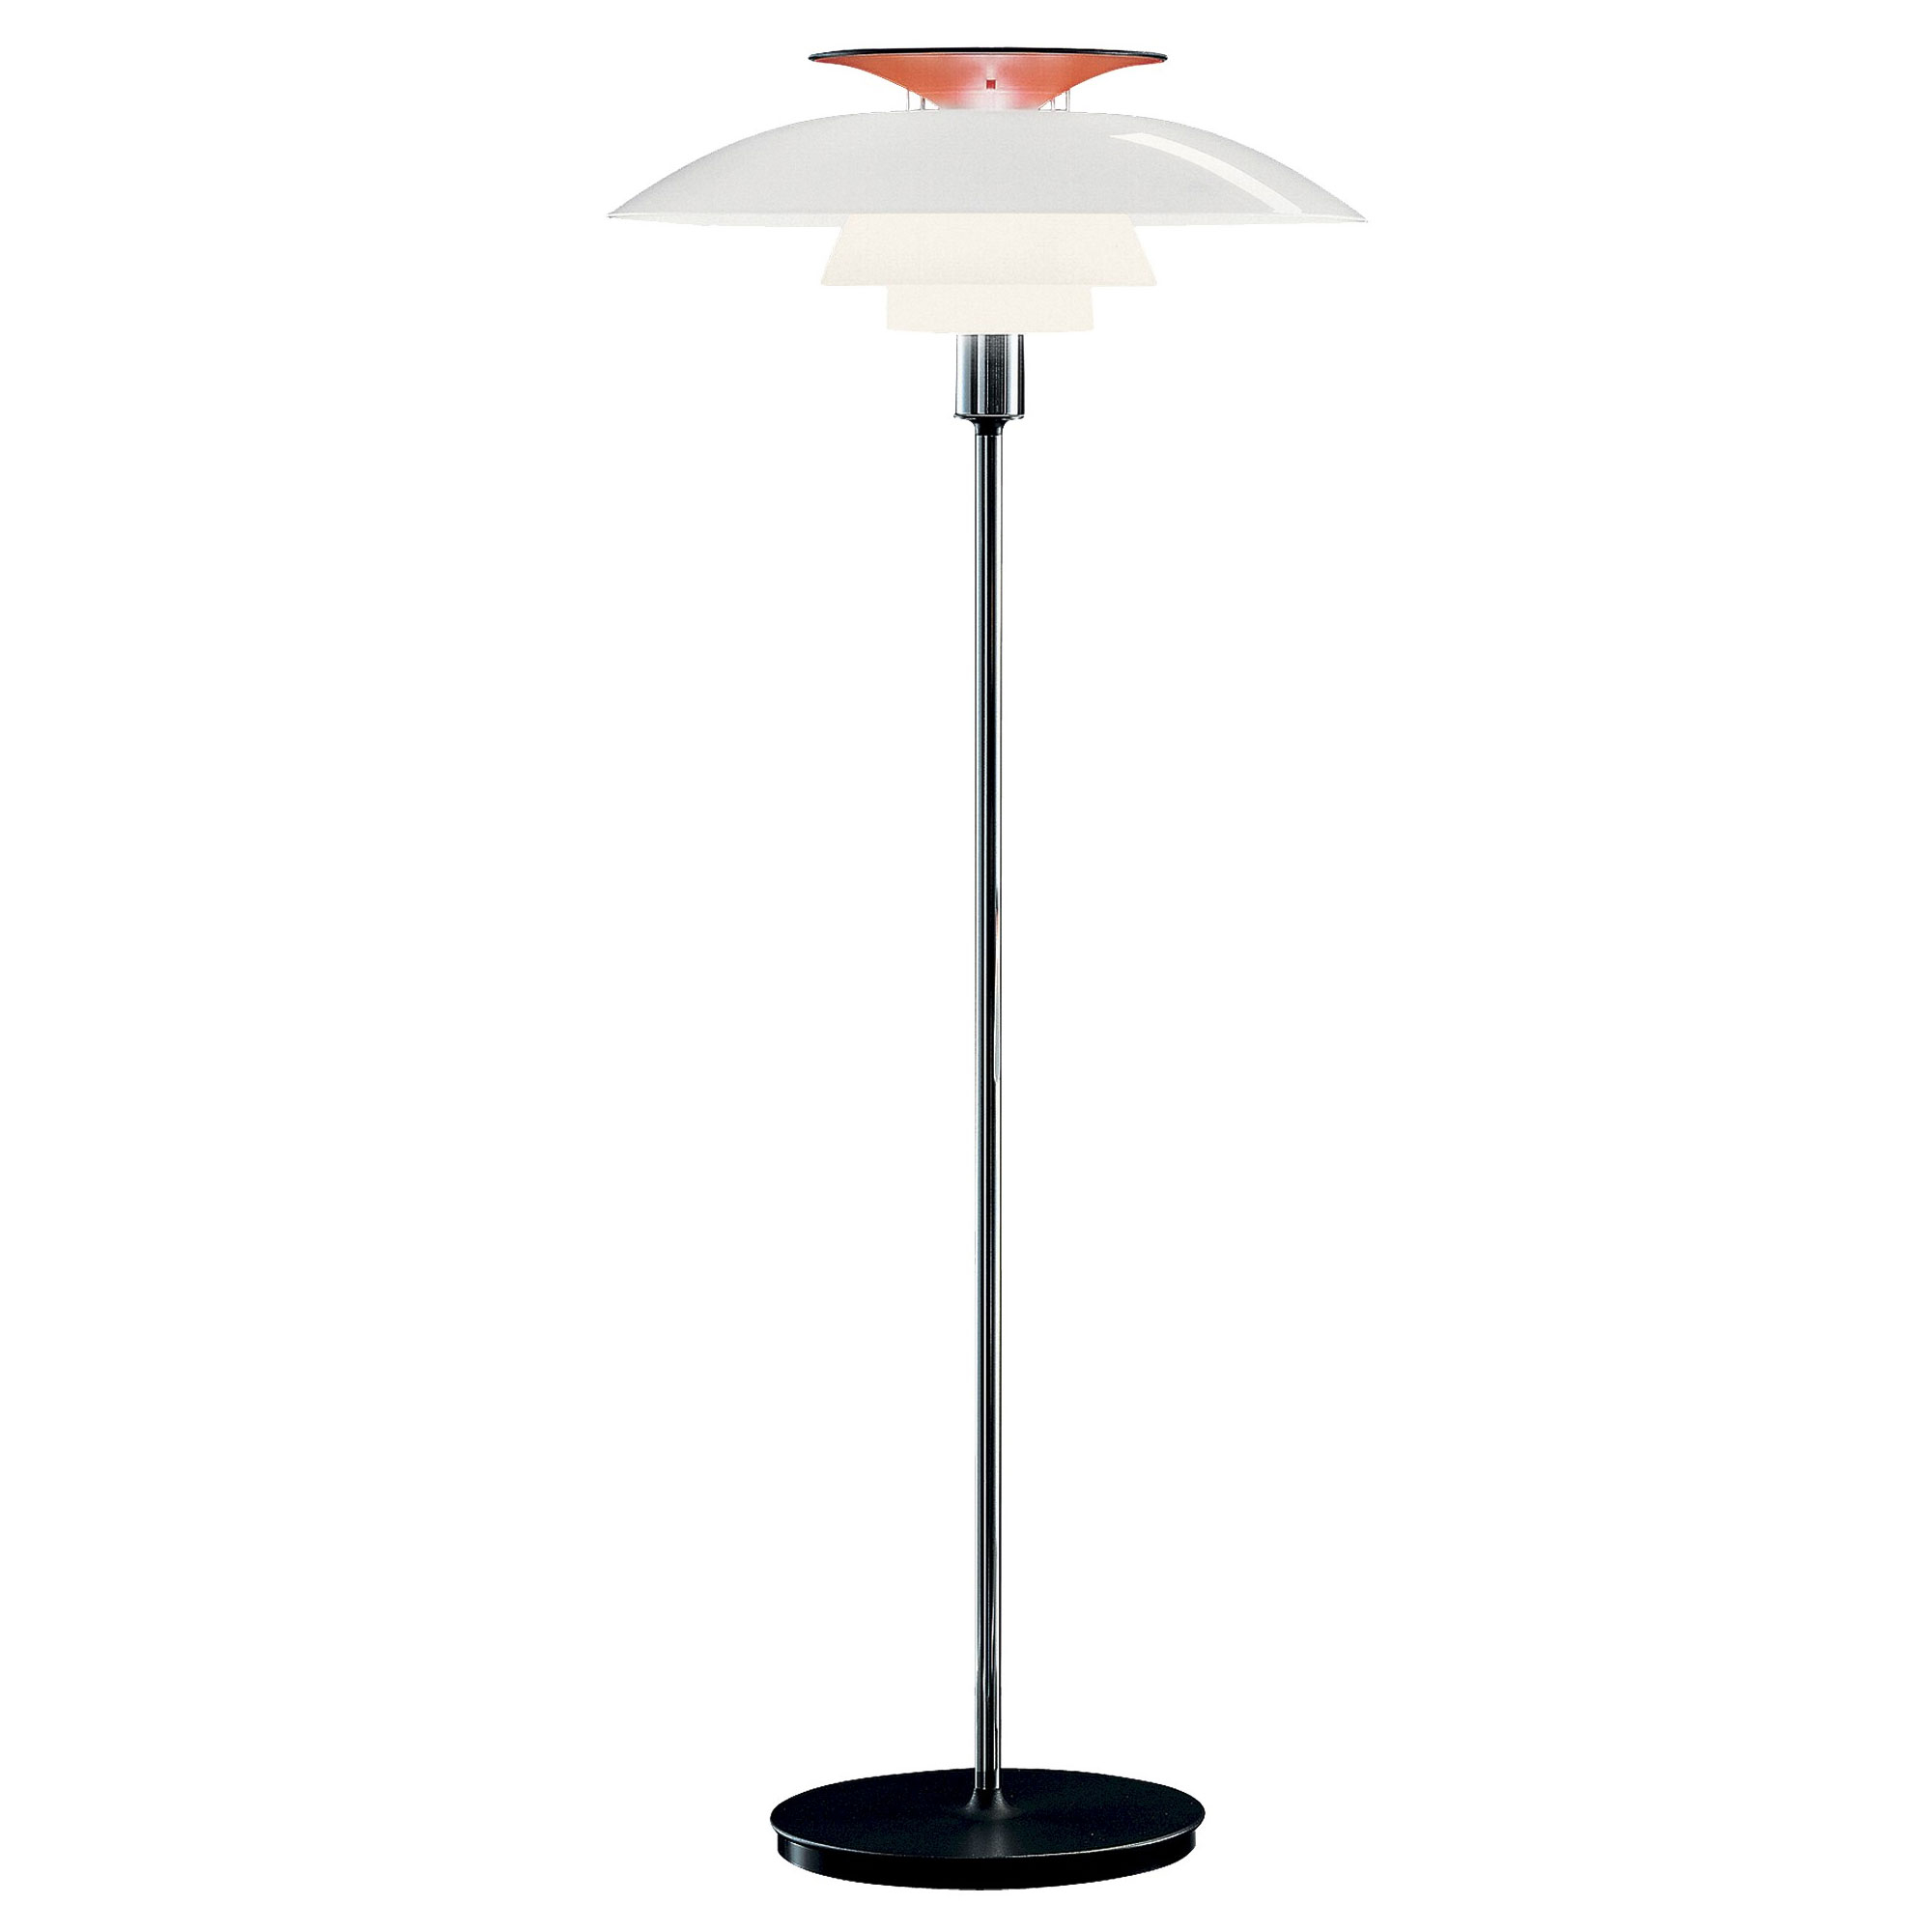 Ph 80 Floor Lamp Louis Poulsen 10000120853 intended for sizing 2000 X 2000